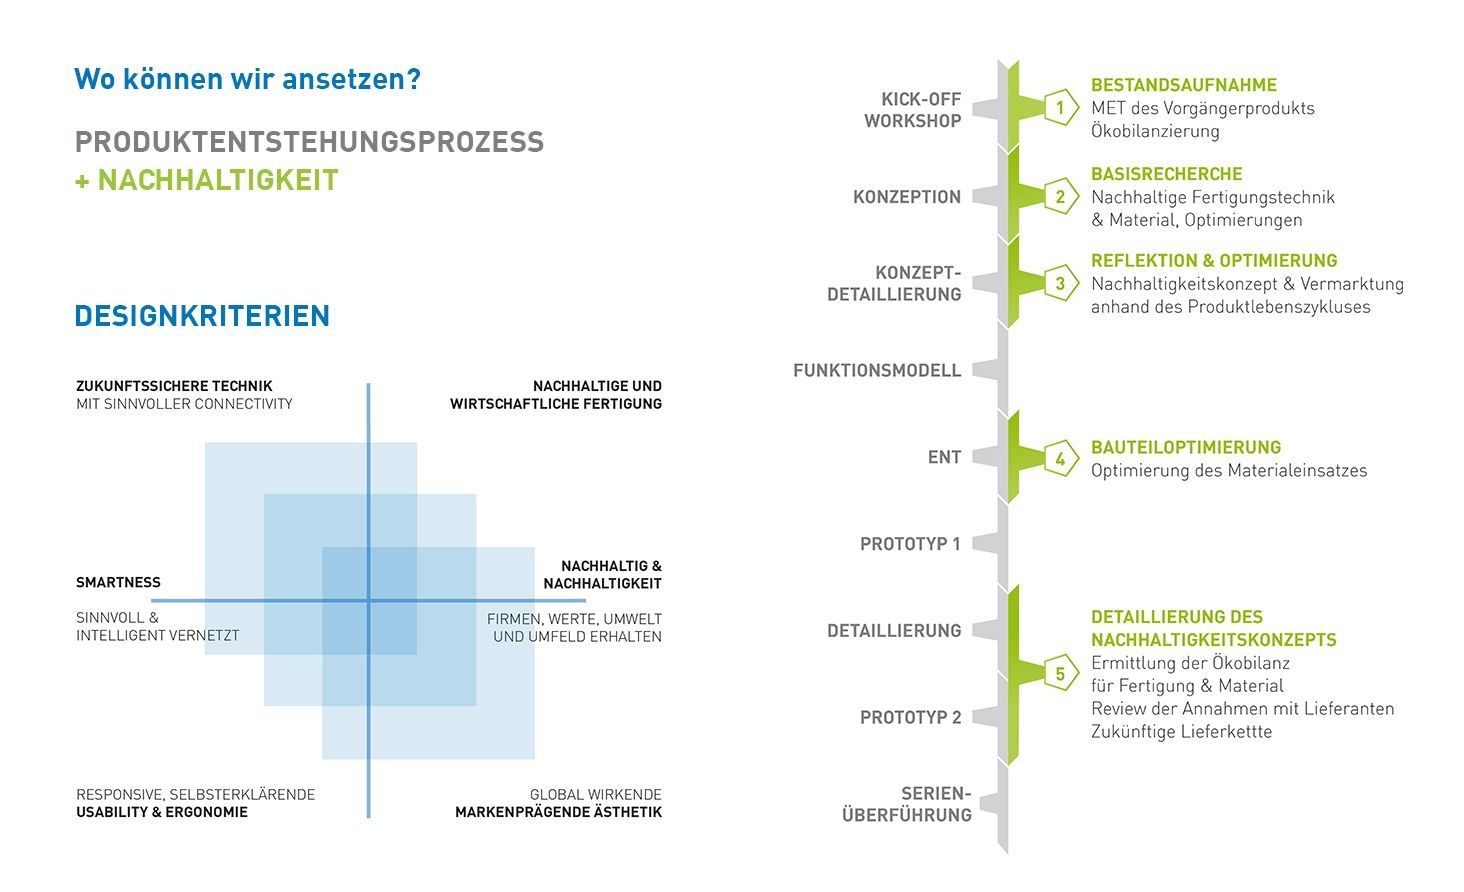 Infographic on the product development process and sustainability